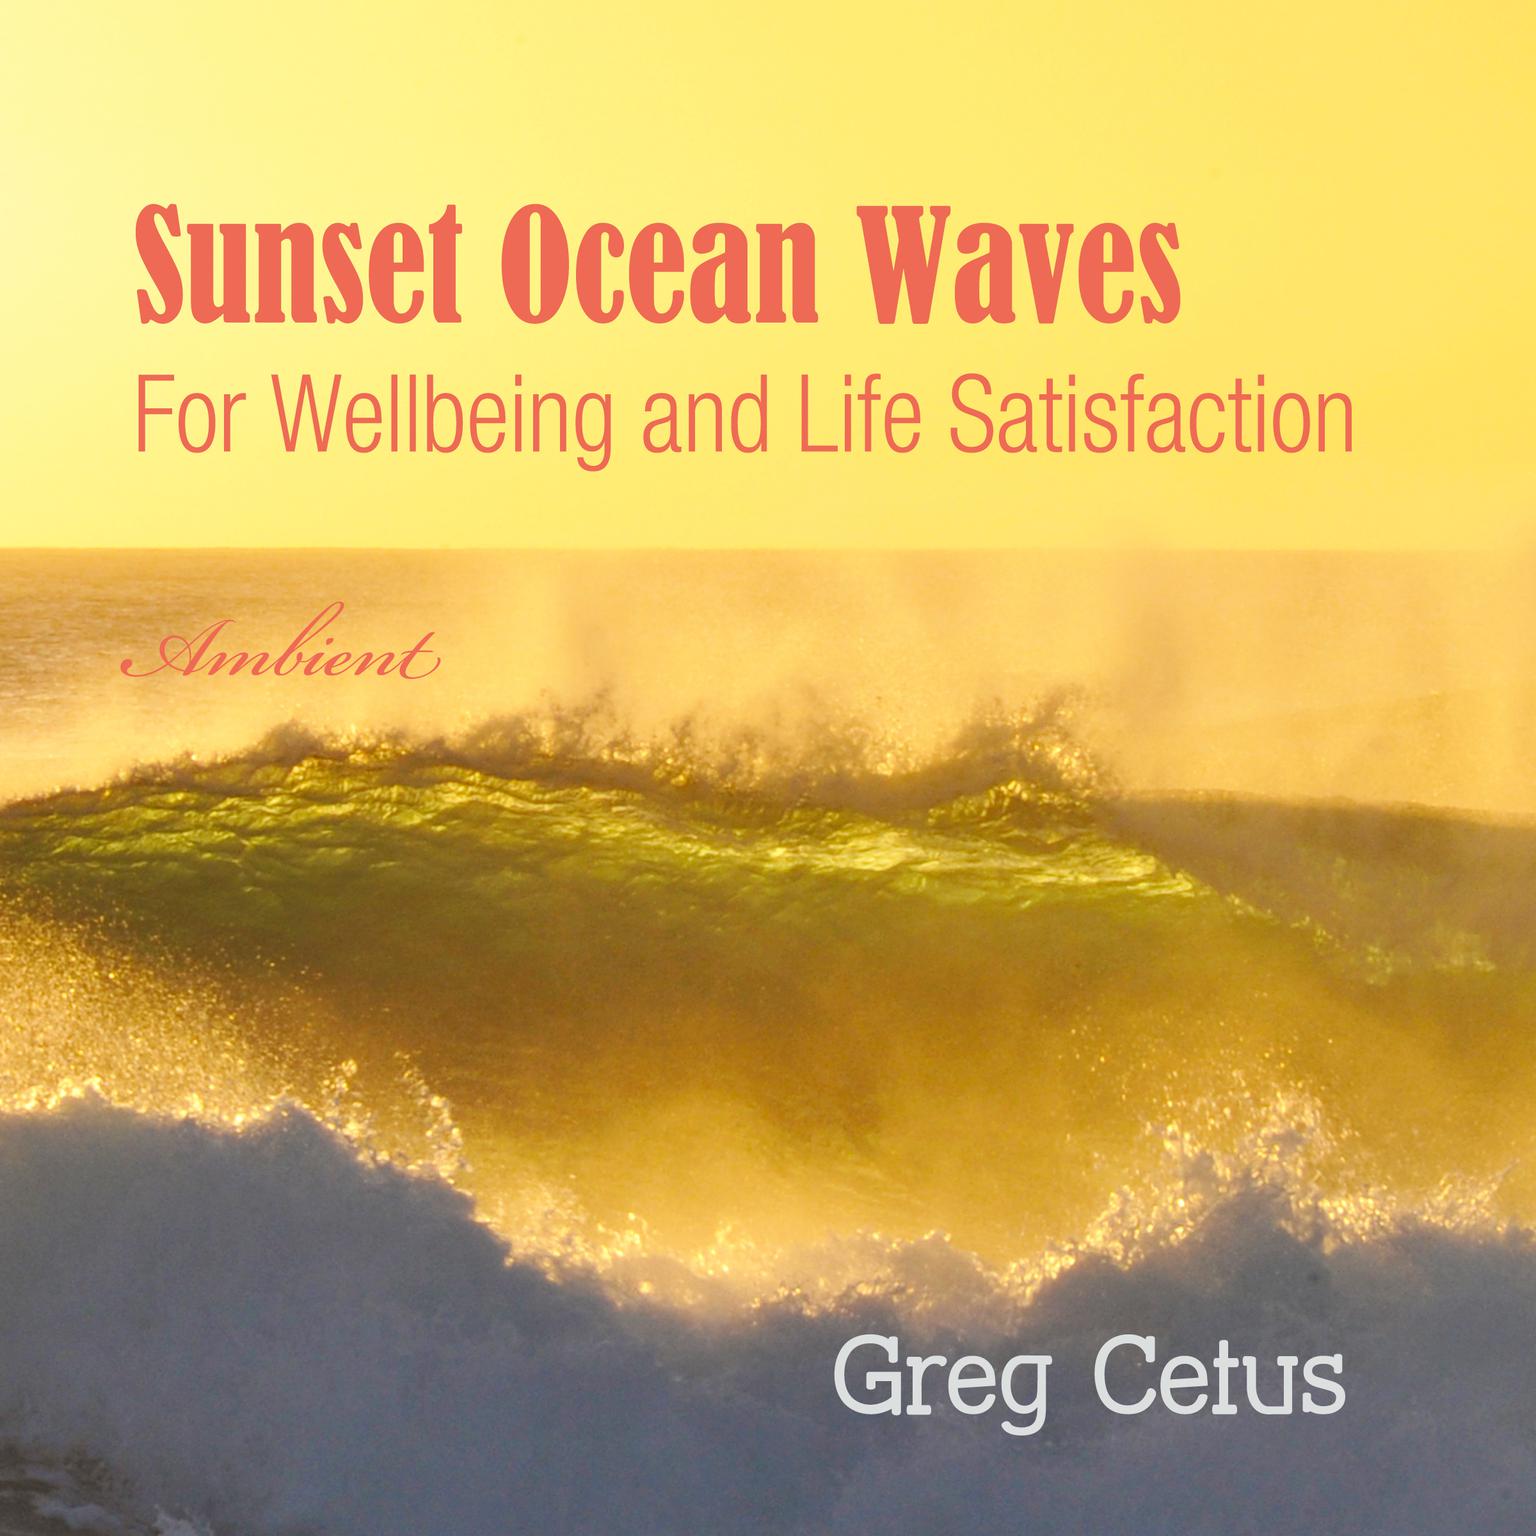 Sunset Ocean Waves: For Wellbeing and Life Satisfaction Audiobook, by Greg Cetus